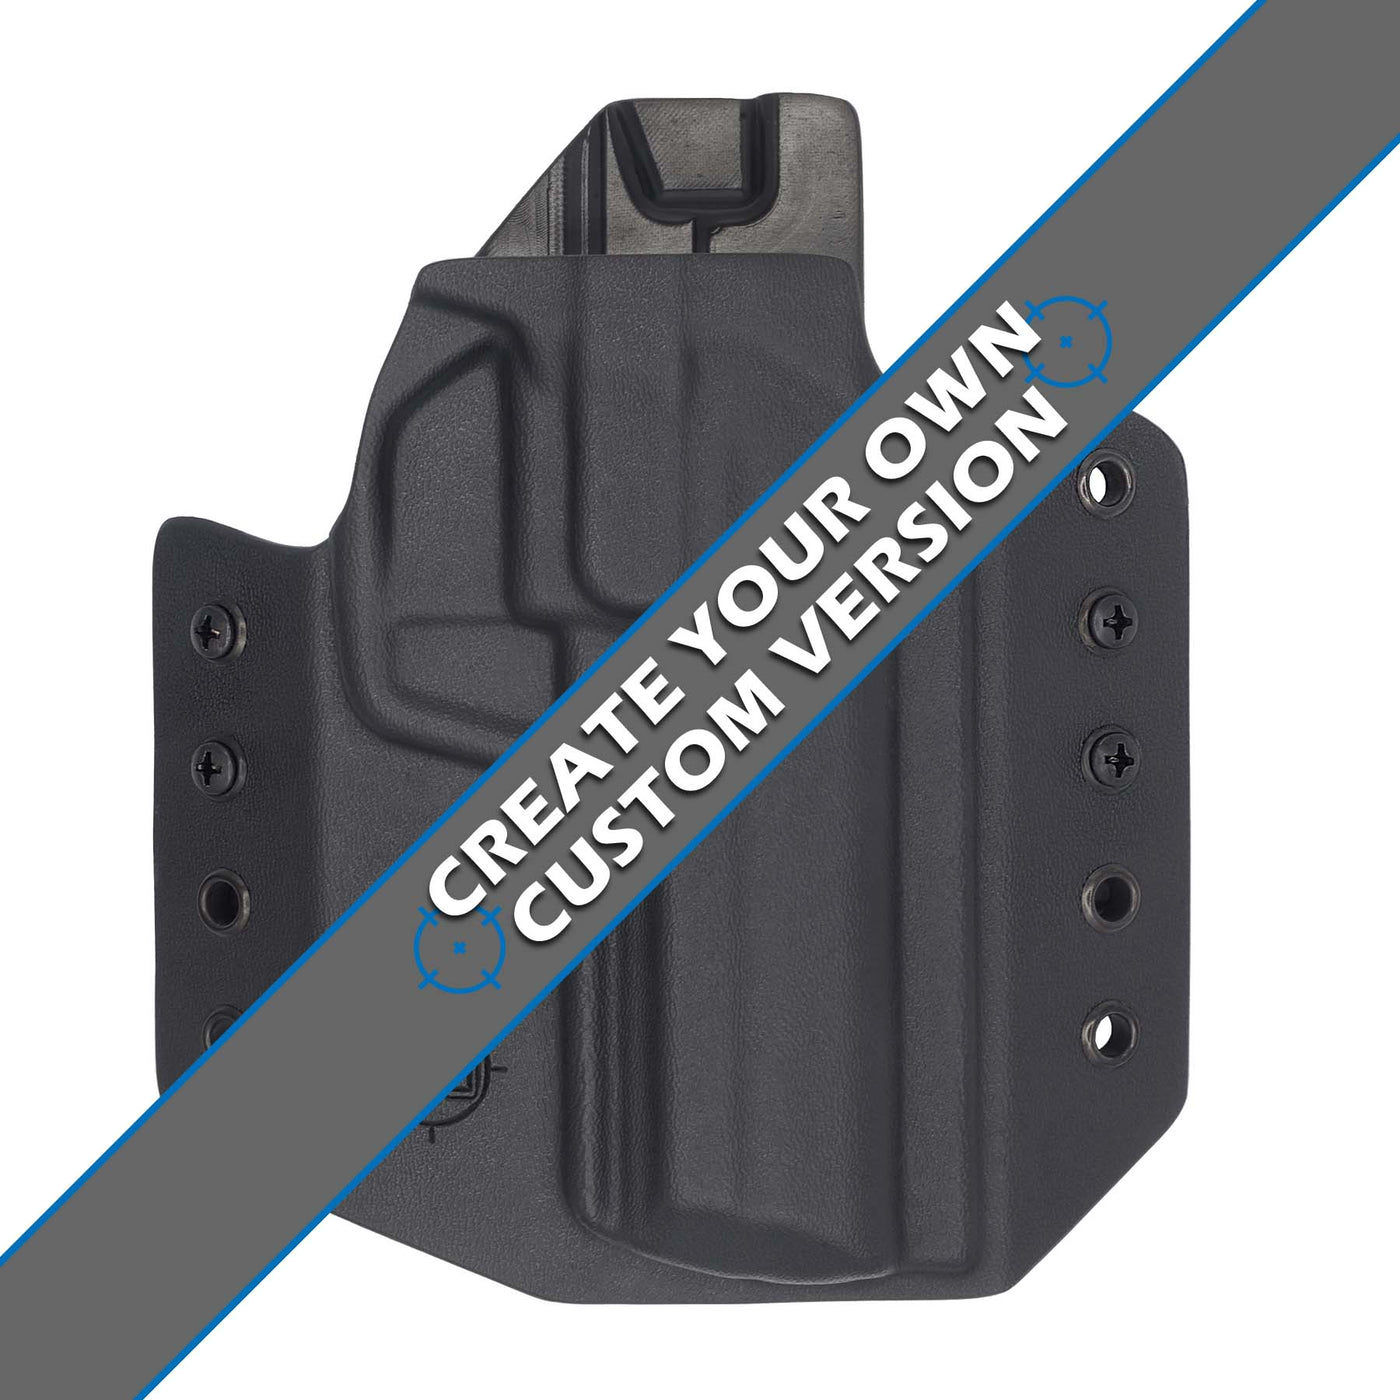 This is a custom C&G Holsters OWB Outside the waistband Holster for the Heckler and Koch HK45.